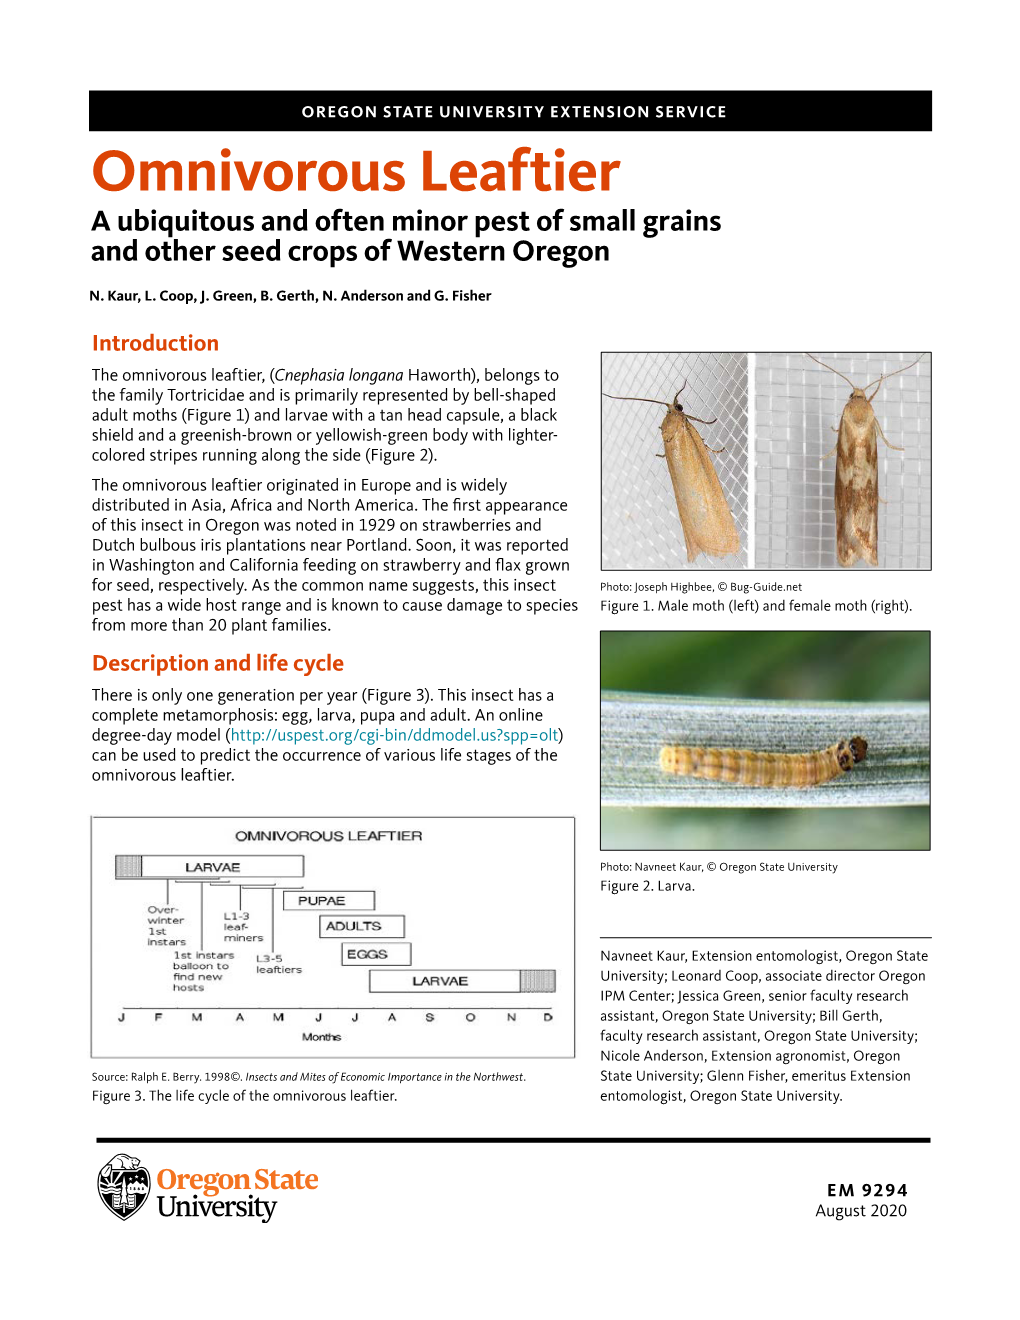 Omnivorous Leaftier a Ubiquitous and Often Minor Pest of Small Grains and Other Seed Crops of Western Oregon